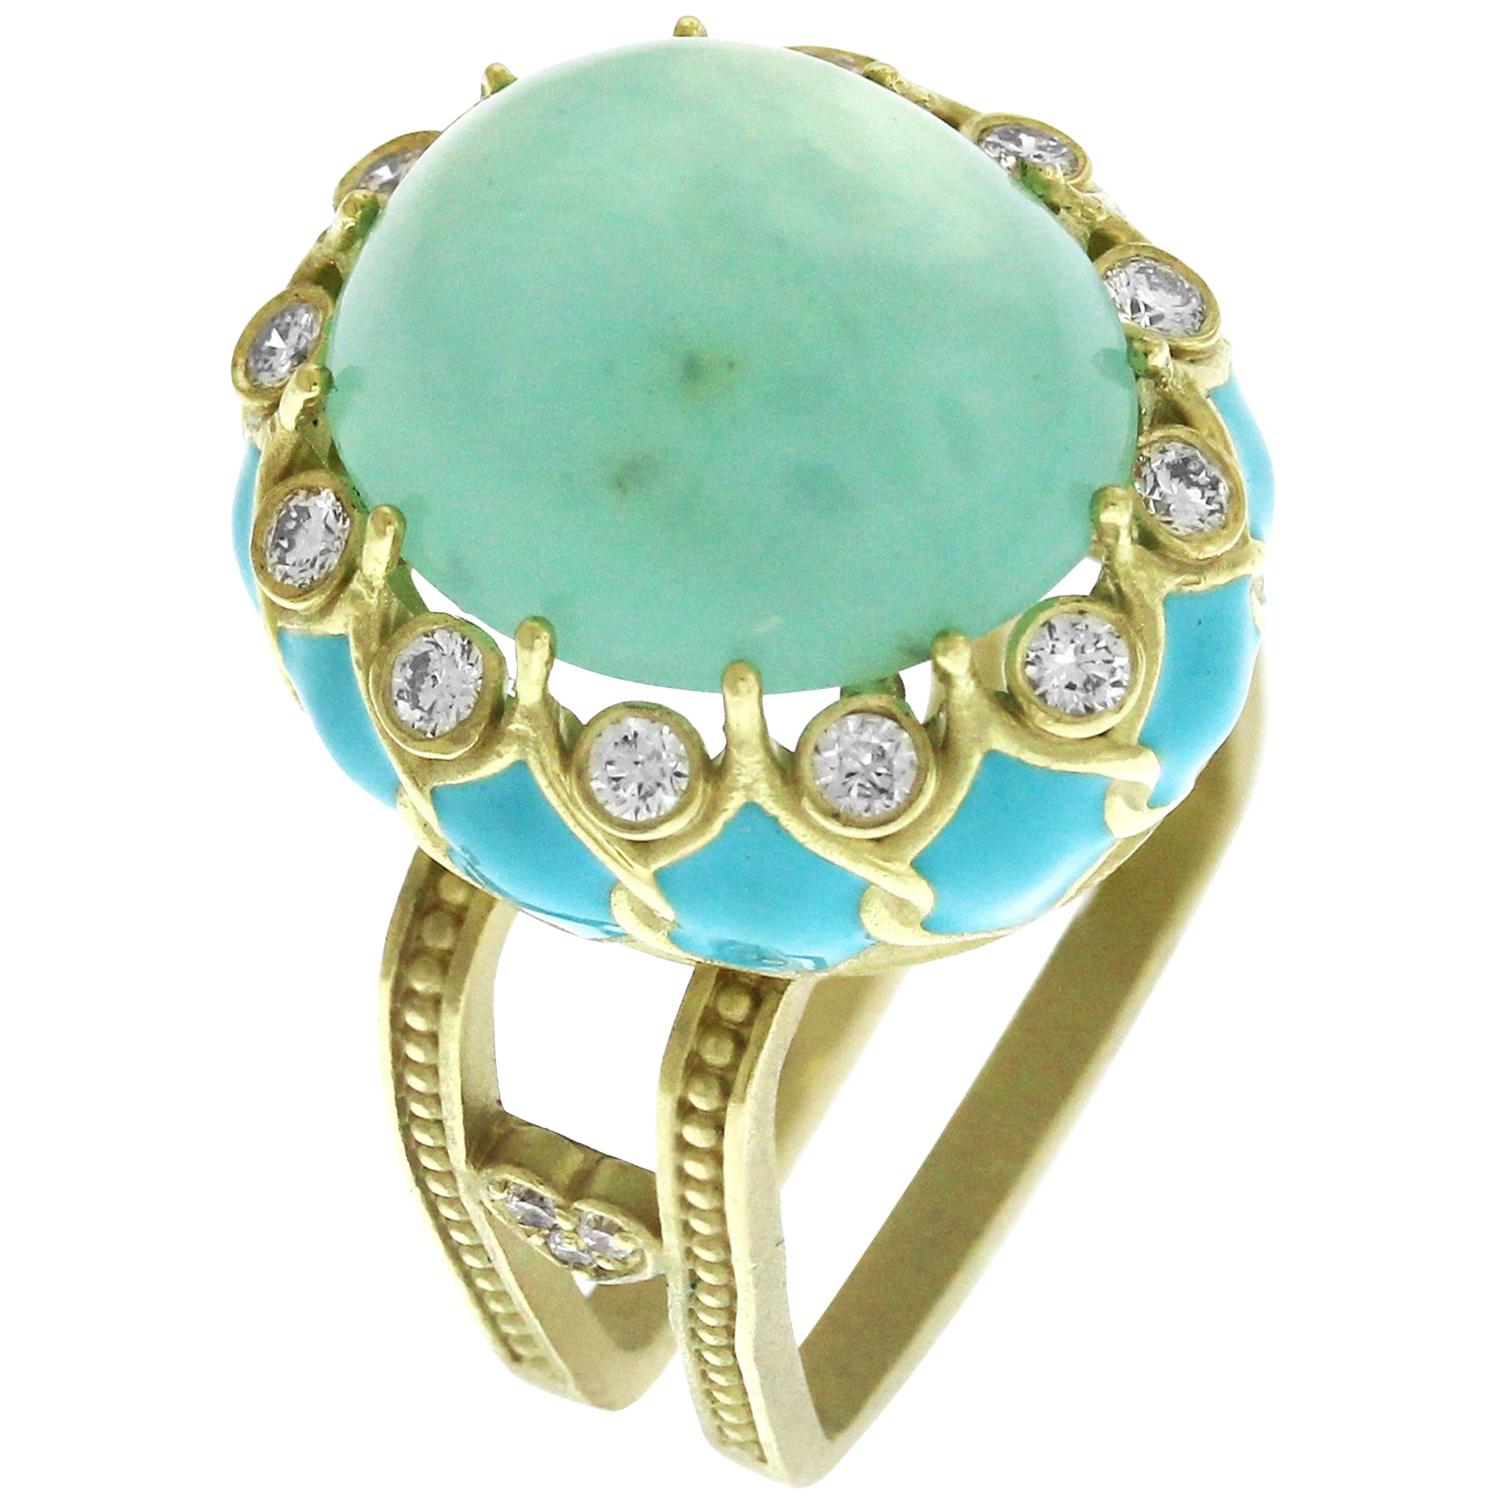 Stambolian Baby Blue Enamel Gold and Diamond Ring with Blue Peruvian Opal Center